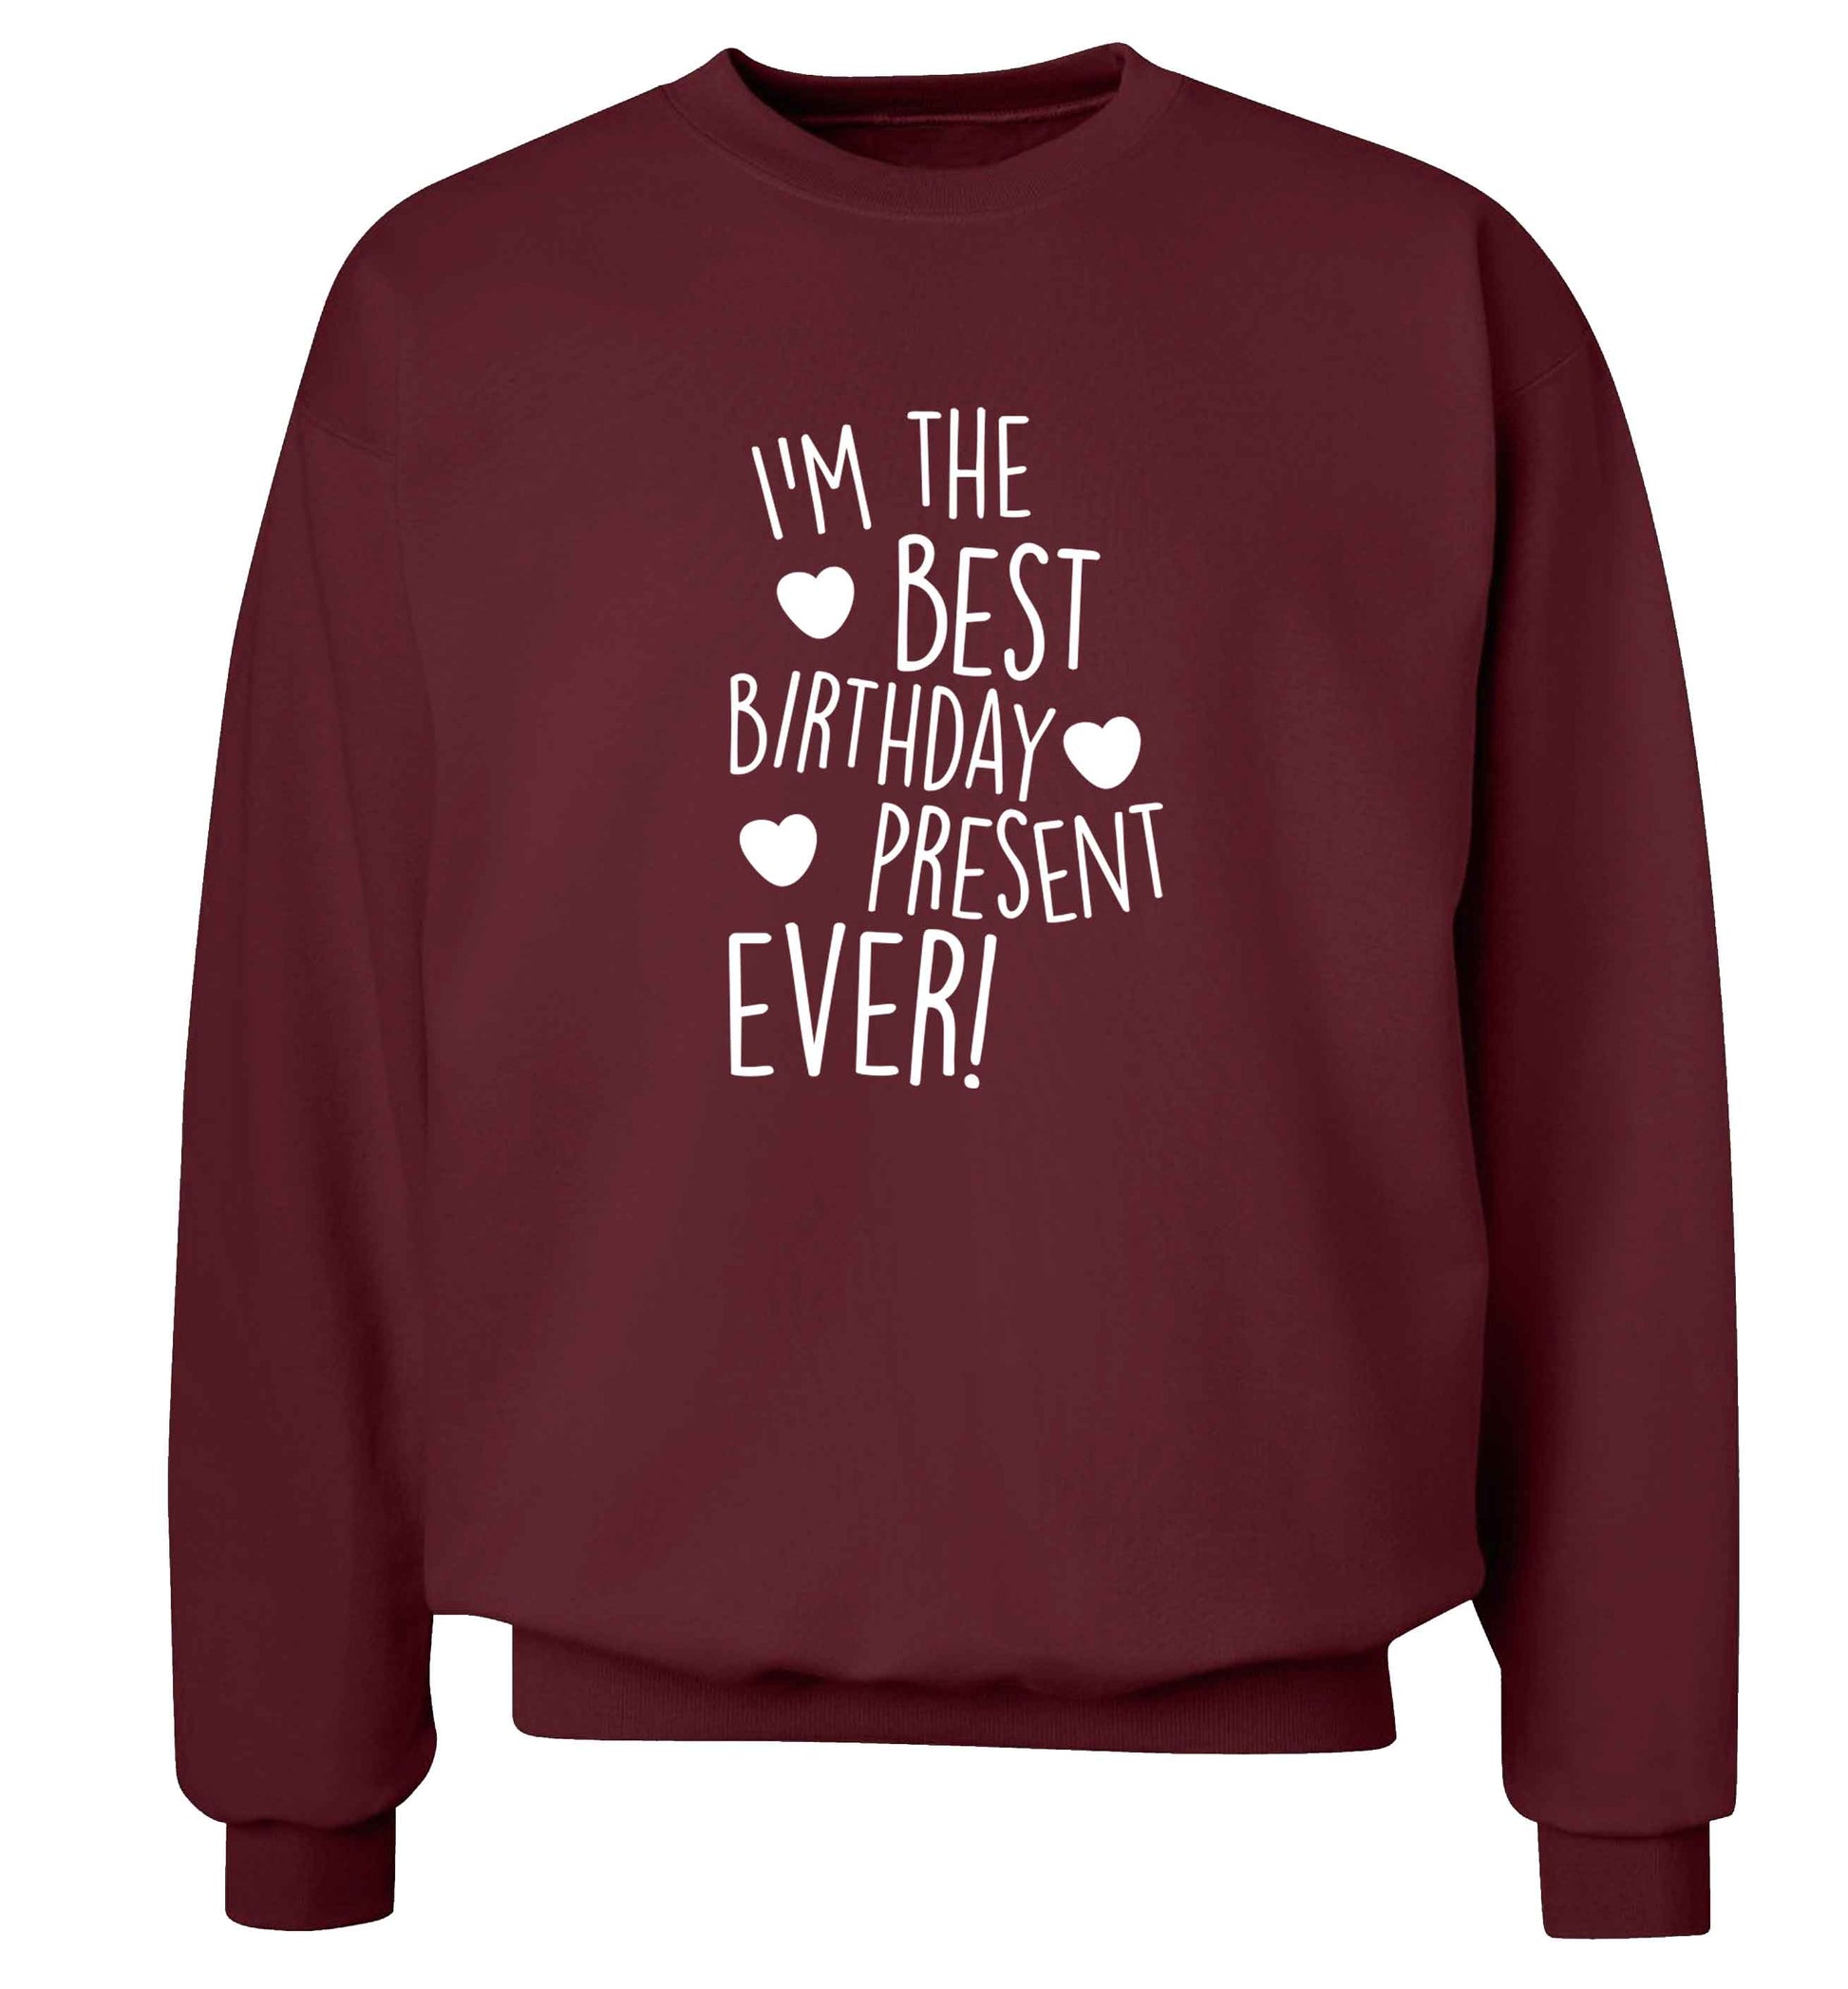 I'm the best birthday present ever adult's unisex maroon sweater 2XL